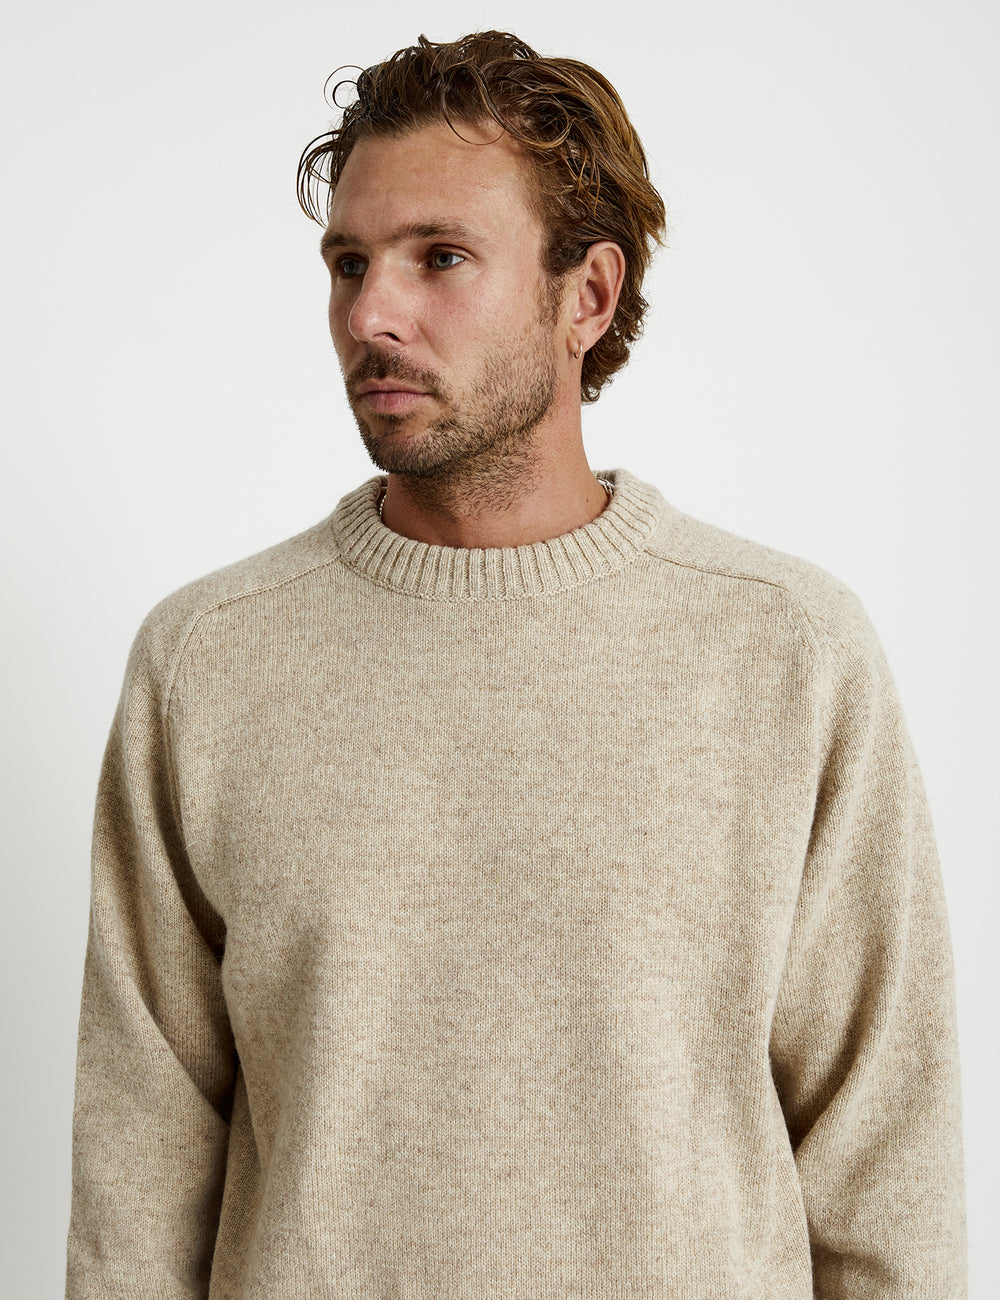 Mr Simple - Portland Knit in Oatmeal | Buster McGee Daylesford